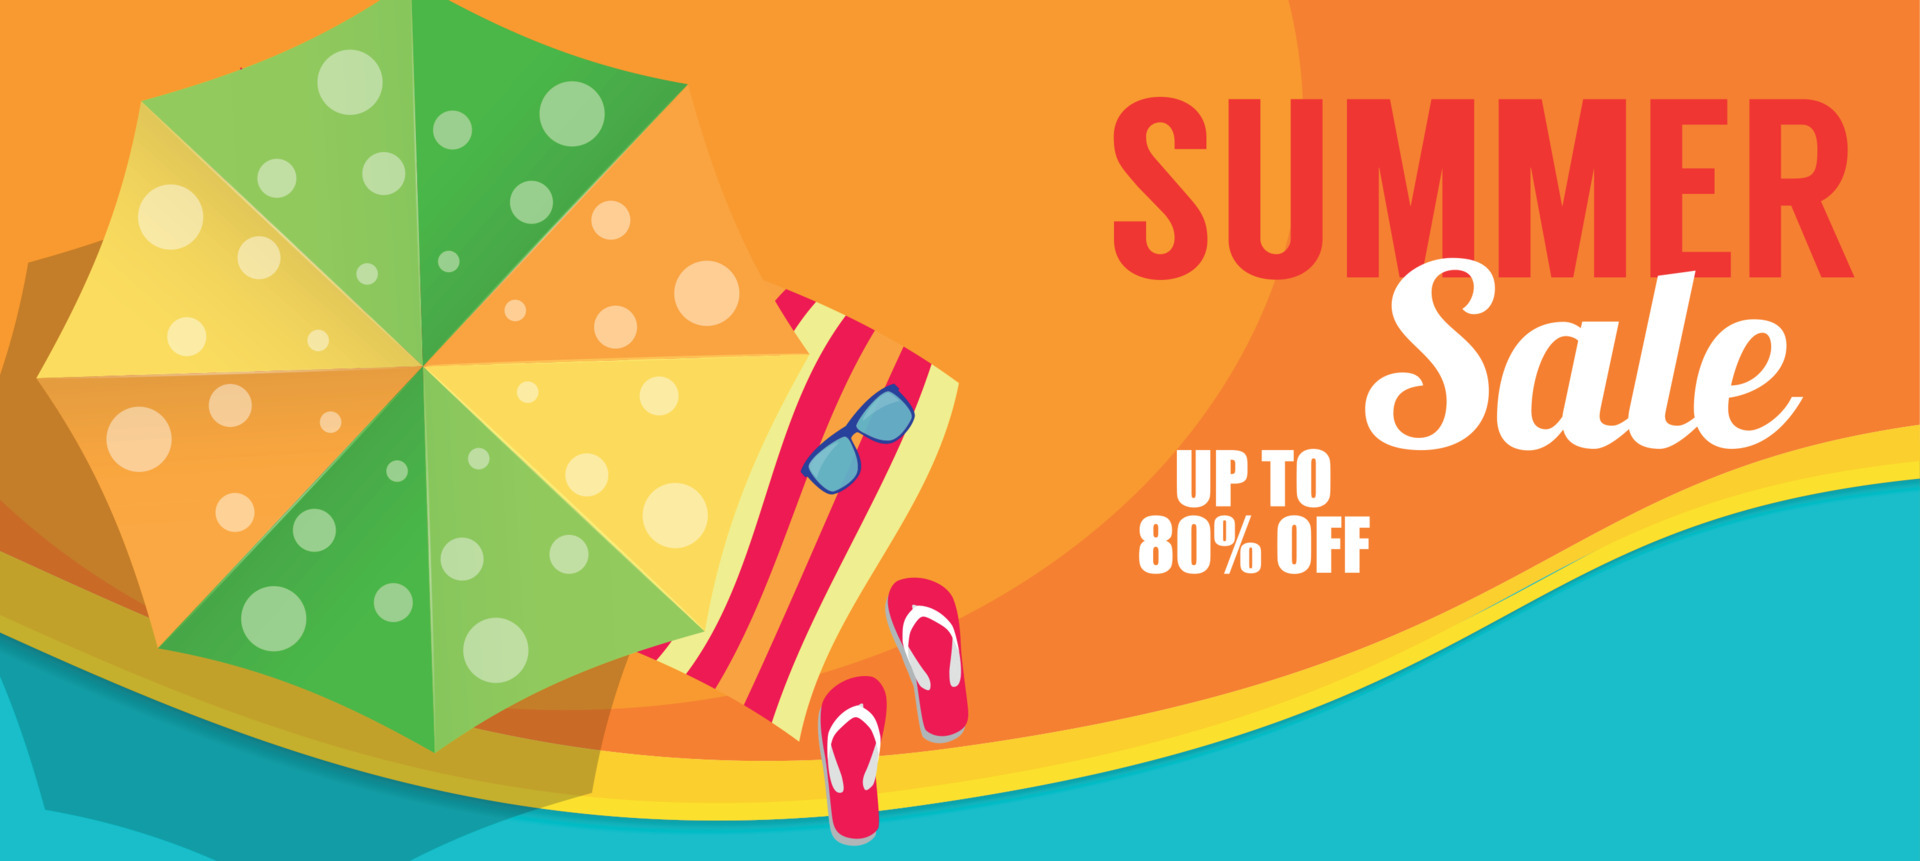 Summer Sale Banner Template for your Business. Vector Illustration ...